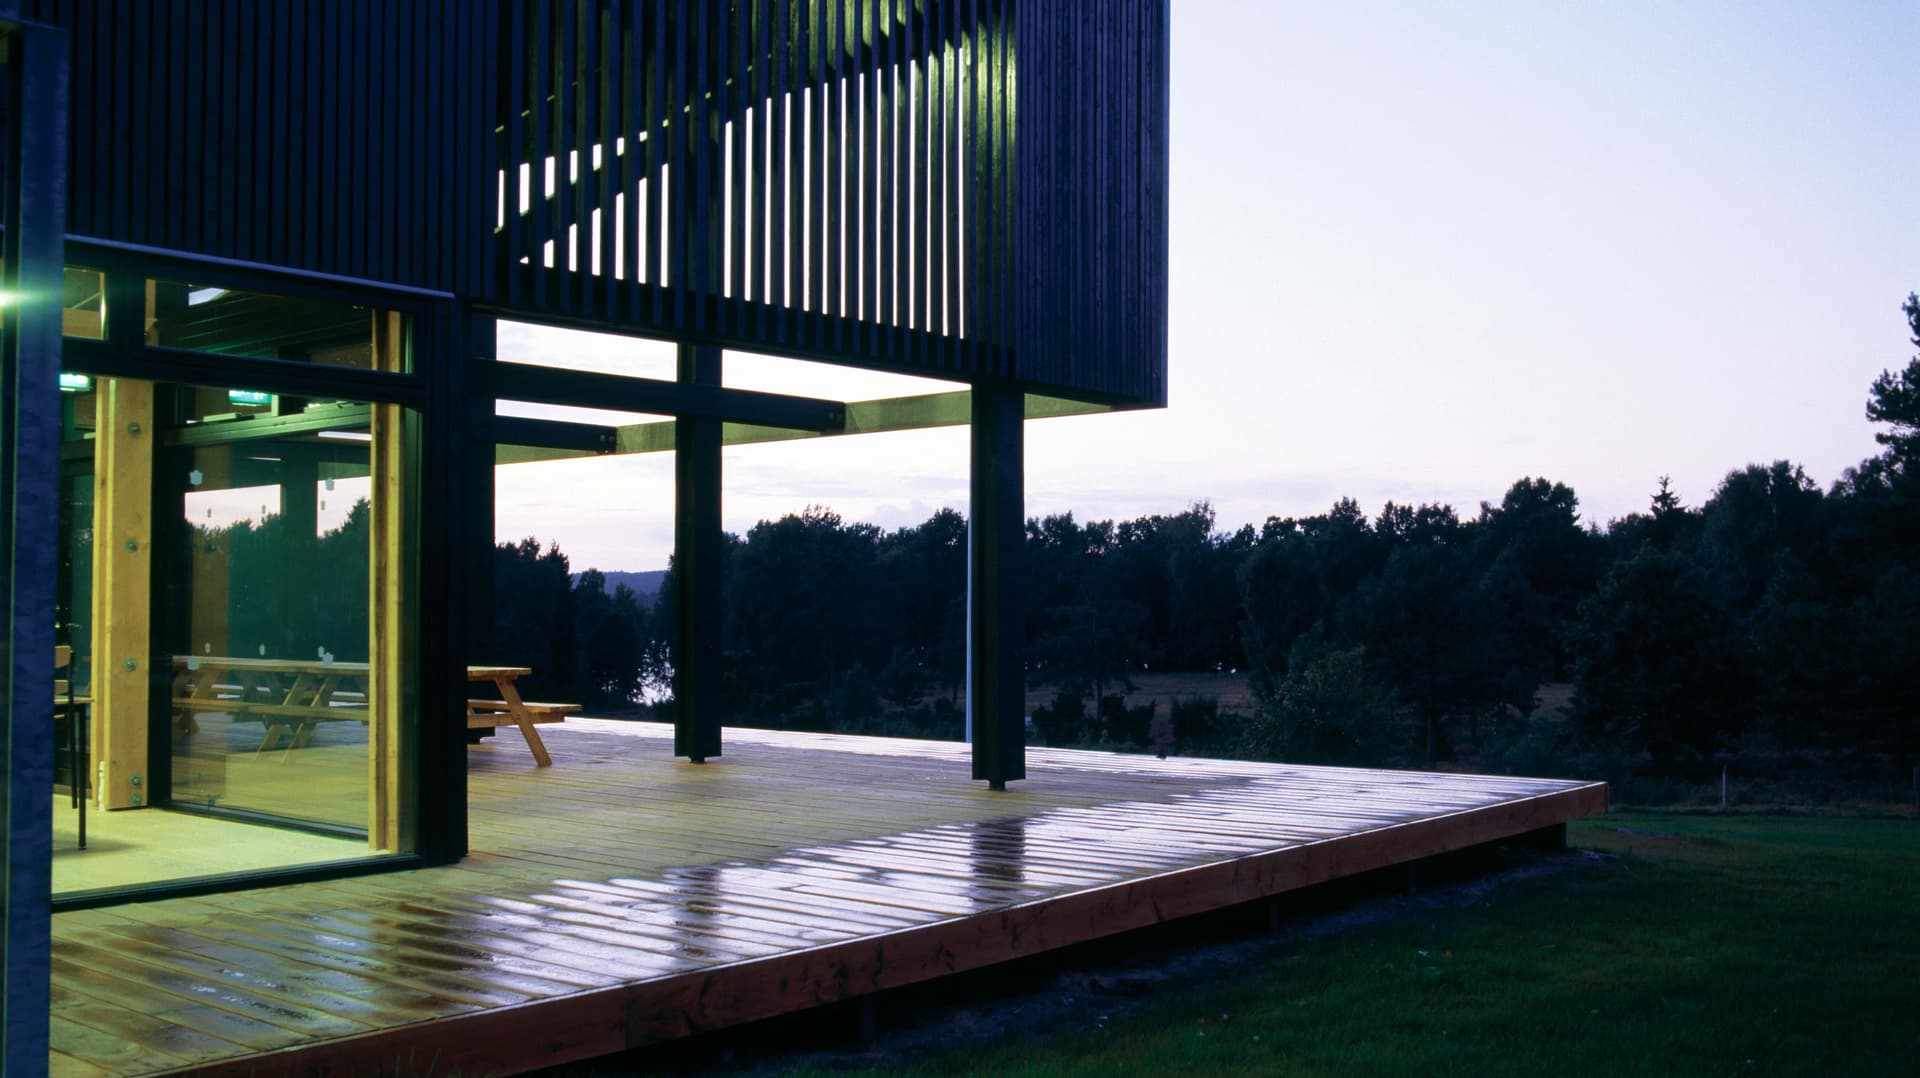 The wooden transparent front of the building offers a panoramic view of the highland lake area.